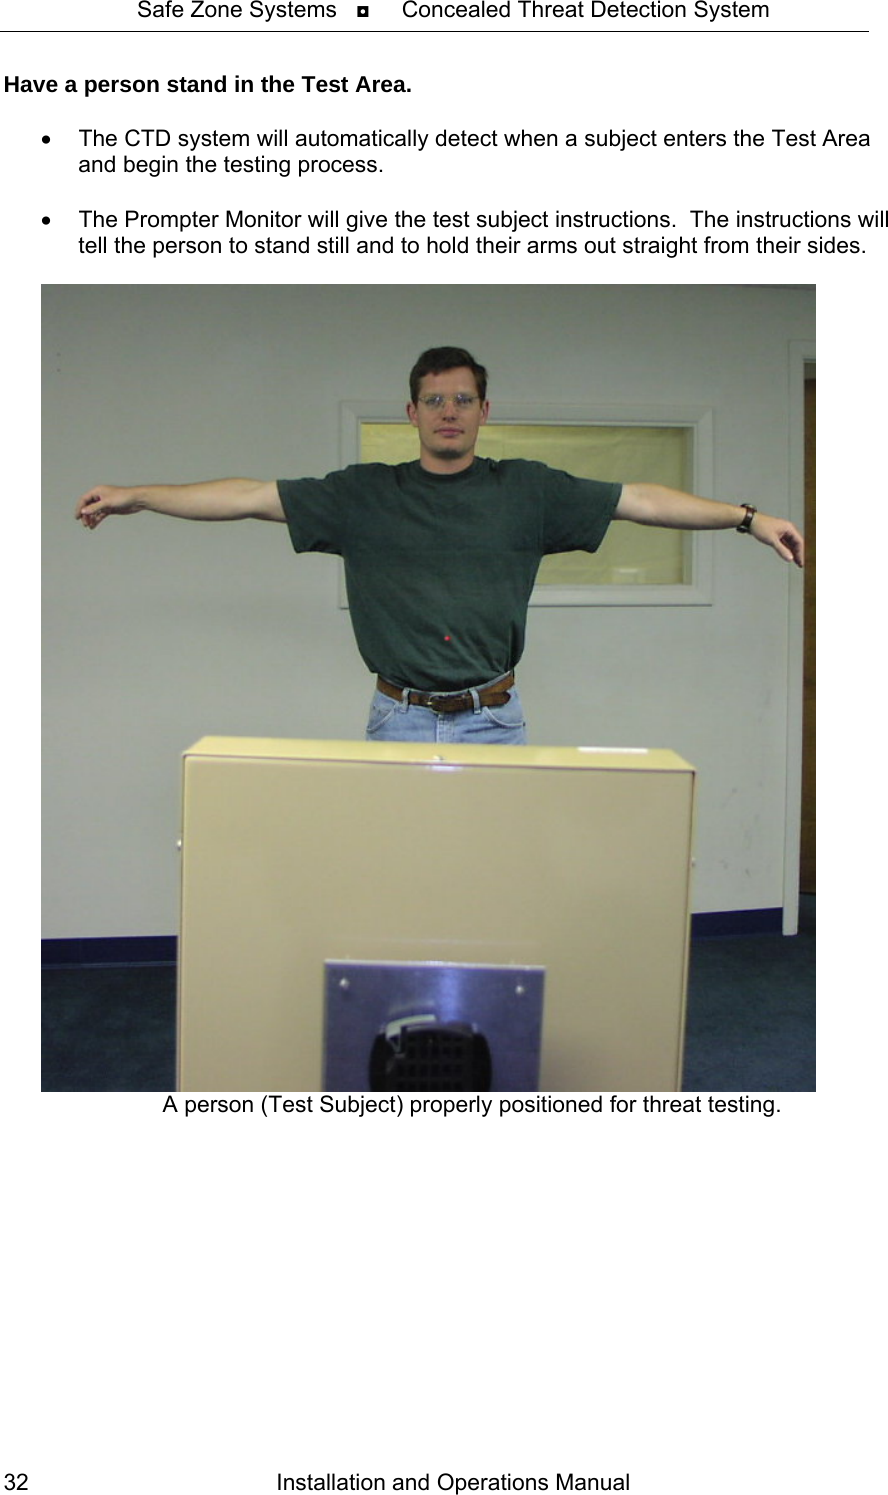 Safe Zone Systems   ◘     Concealed Threat Detection System  Have a person stand in the Test Area.    •  The CTD system will automatically detect when a subject enters the Test Area and begin the testing process.  •  The Prompter Monitor will give the test subject instructions.  The instructions will tell the person to stand still and to hold their arms out straight from their sides.    A person (Test Subject) properly positioned for threat testing. Installation and Operations Manual 32 